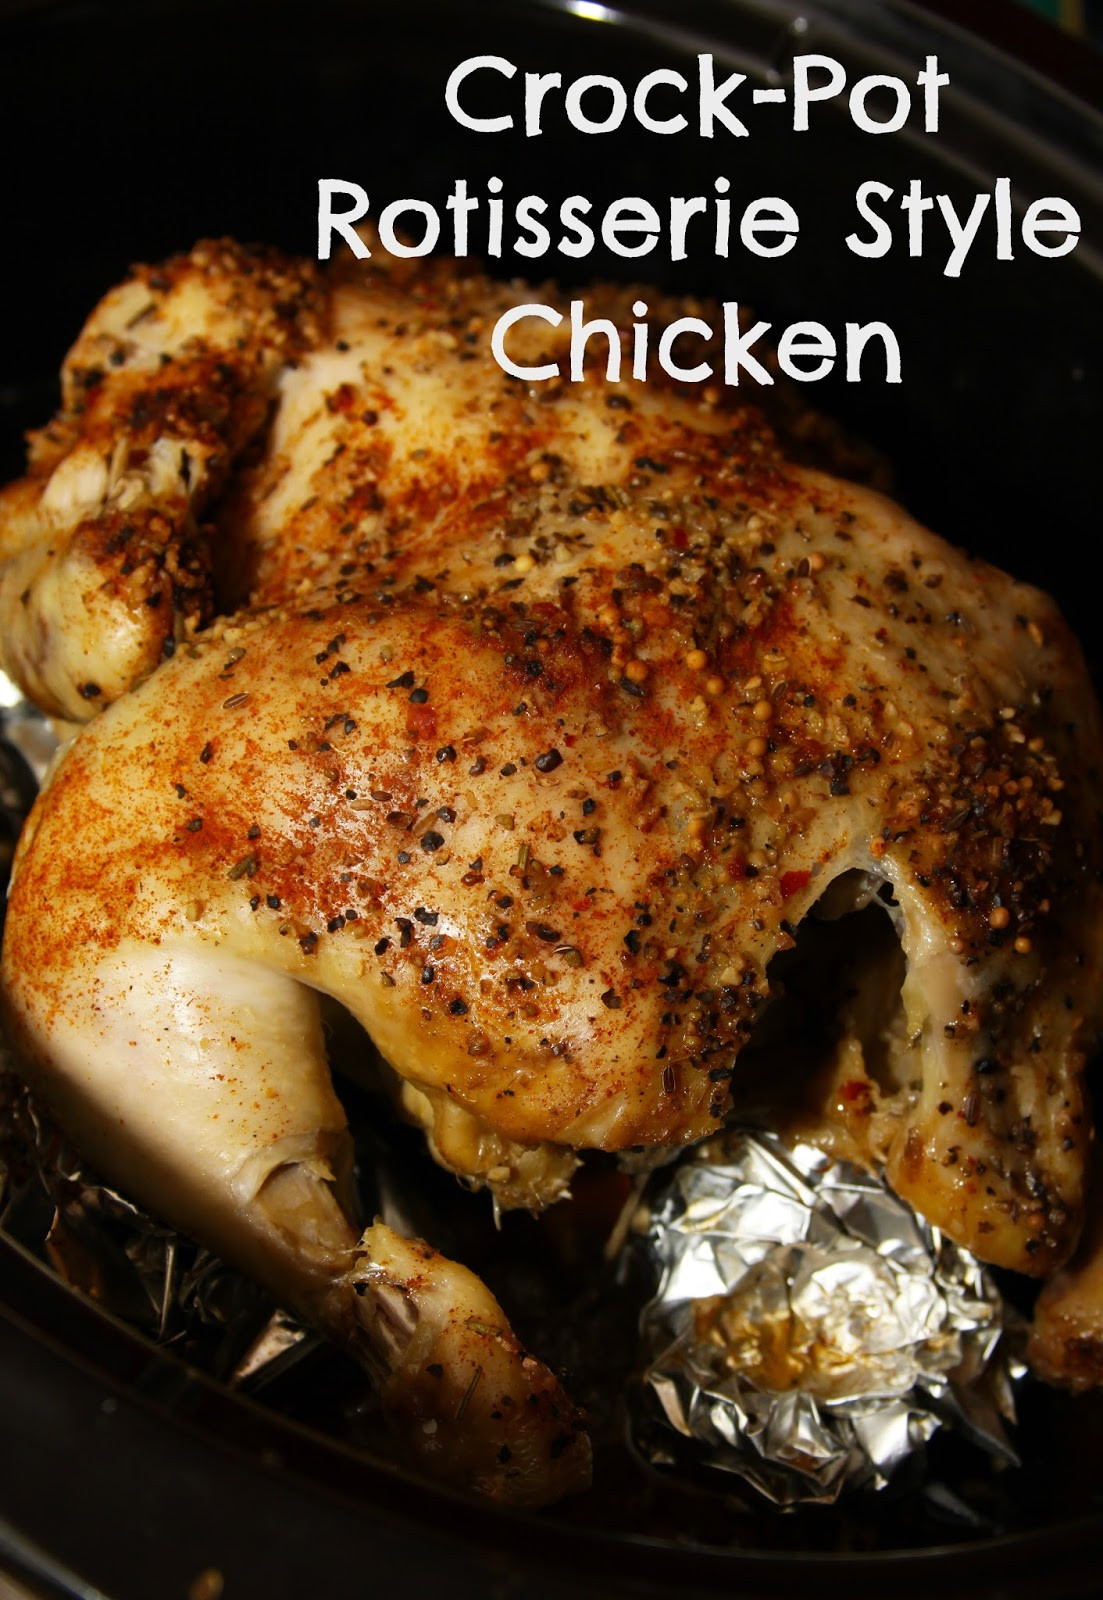 Whole Chicken Crock Pot Recipe
 For the Love of Food Crock Pot Rotisserie Style Chicken